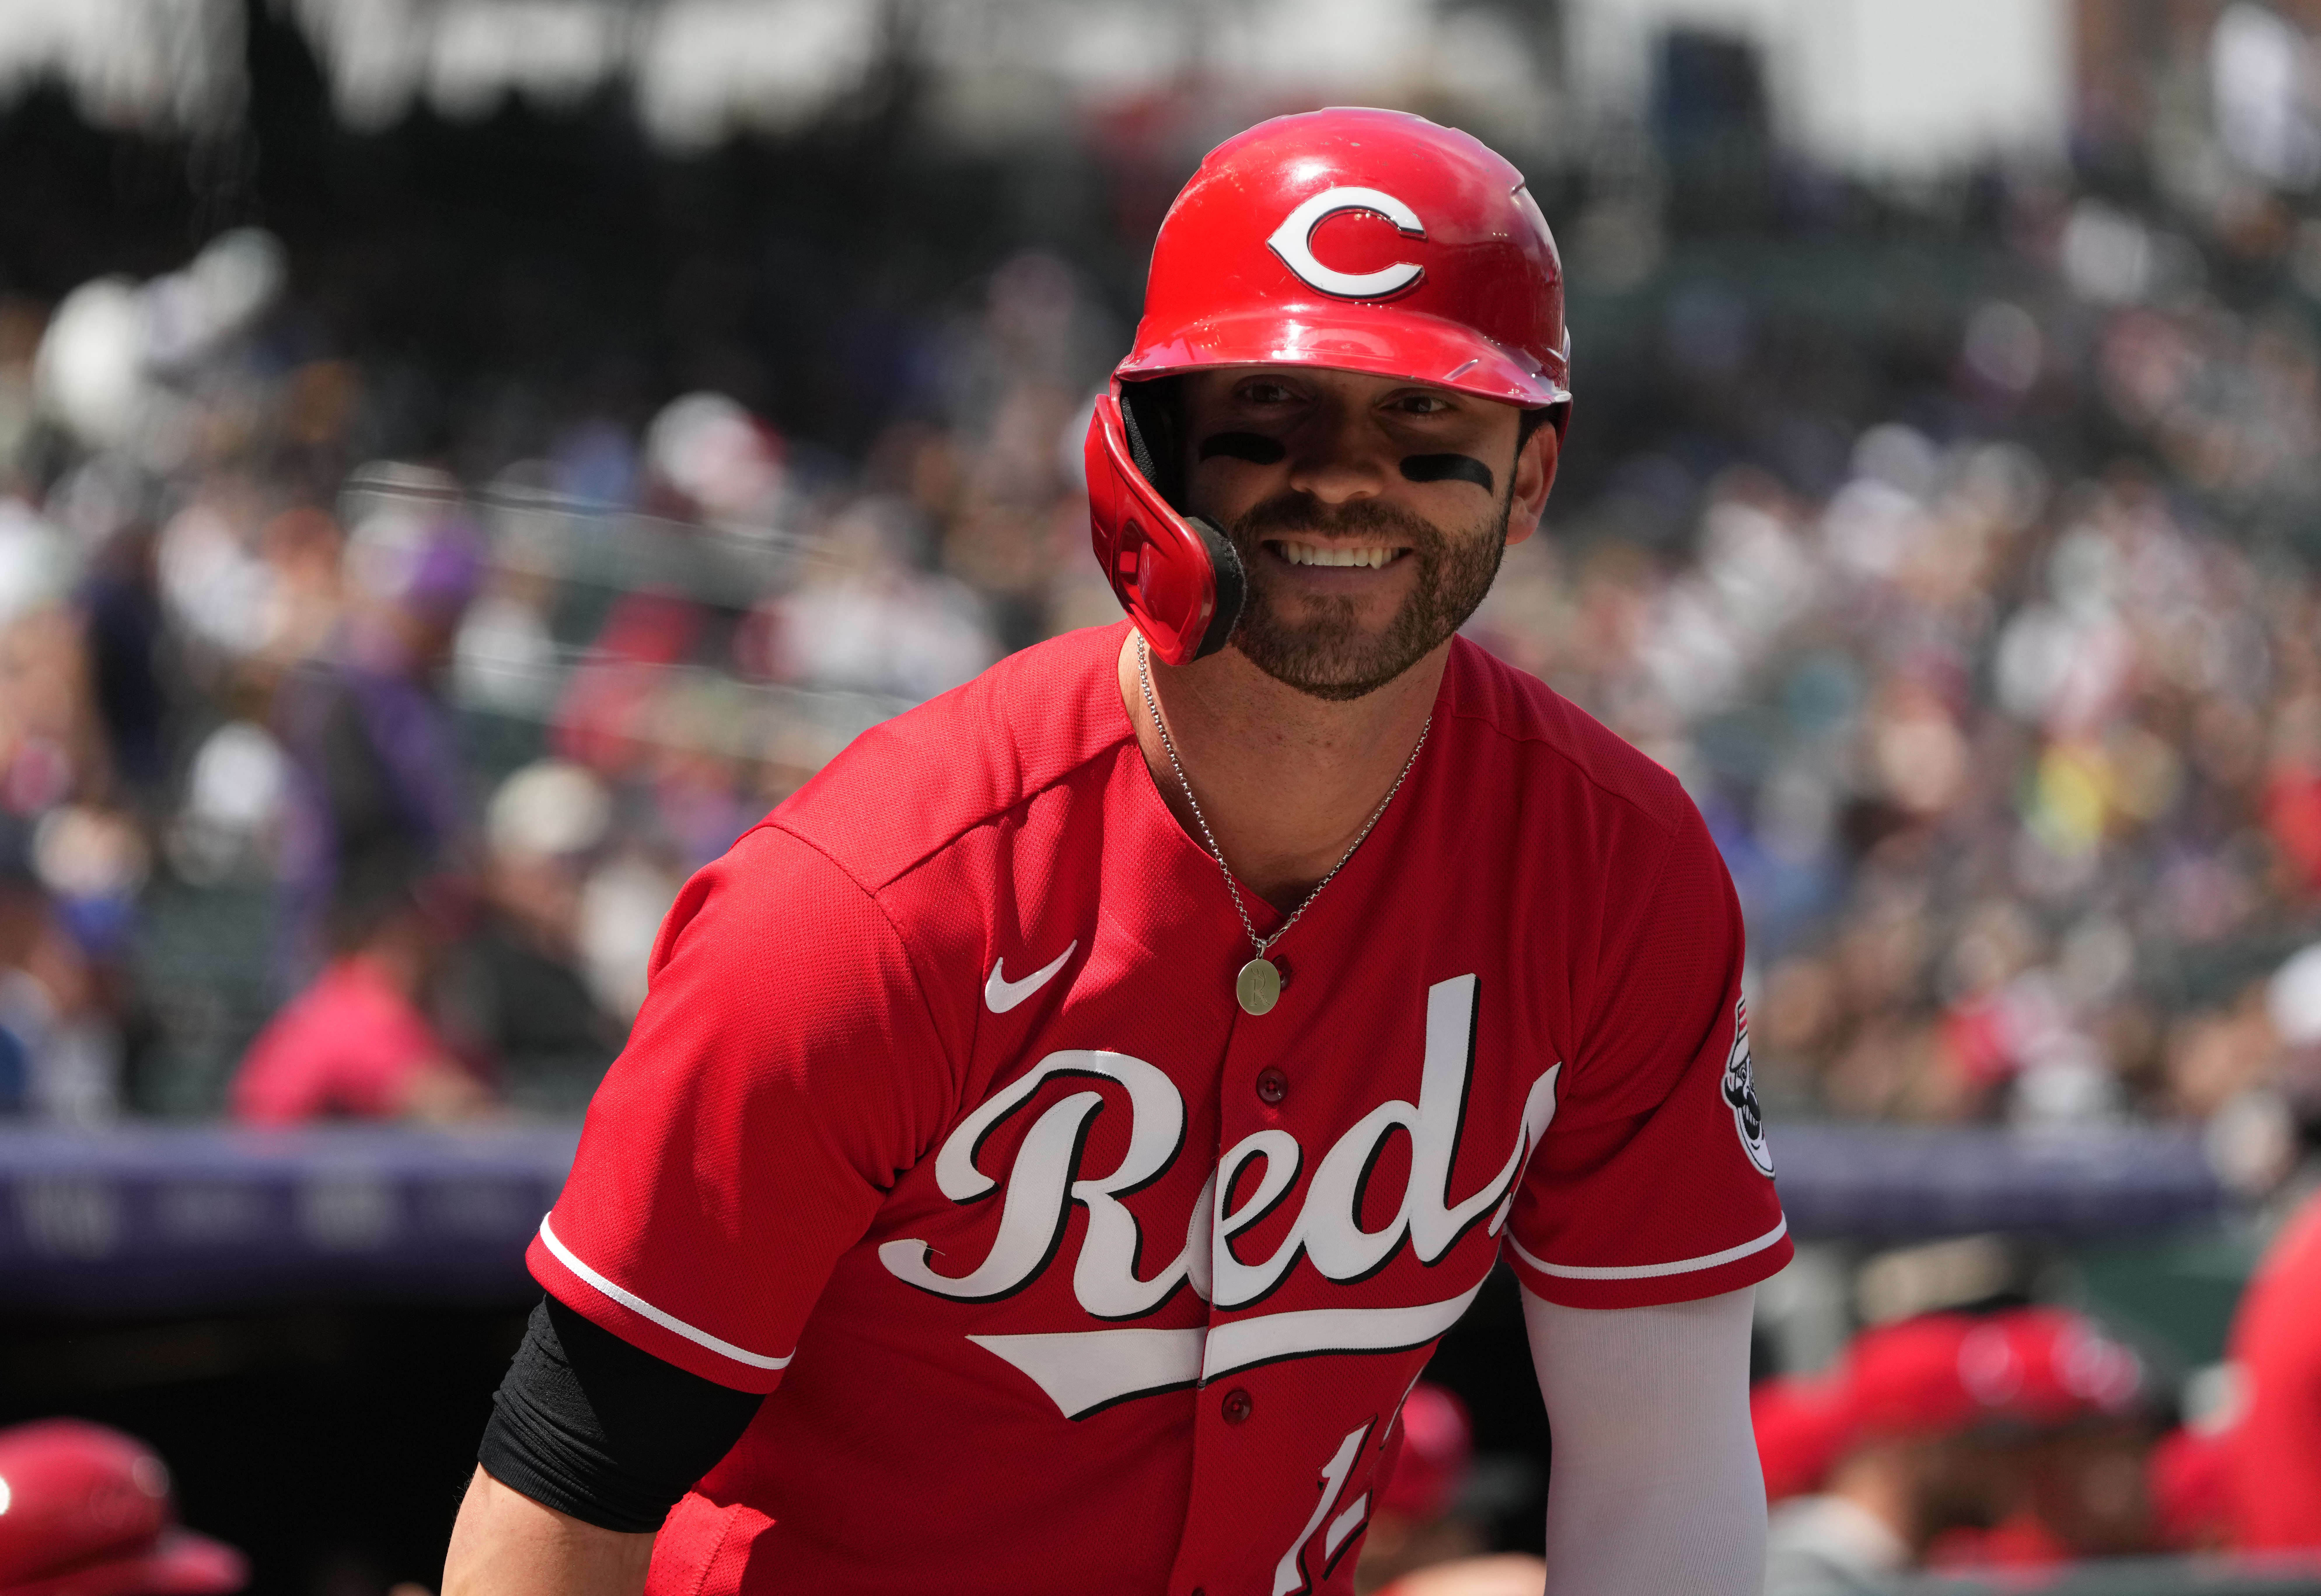 Mets acquire OF Tyler Naquin from Reds